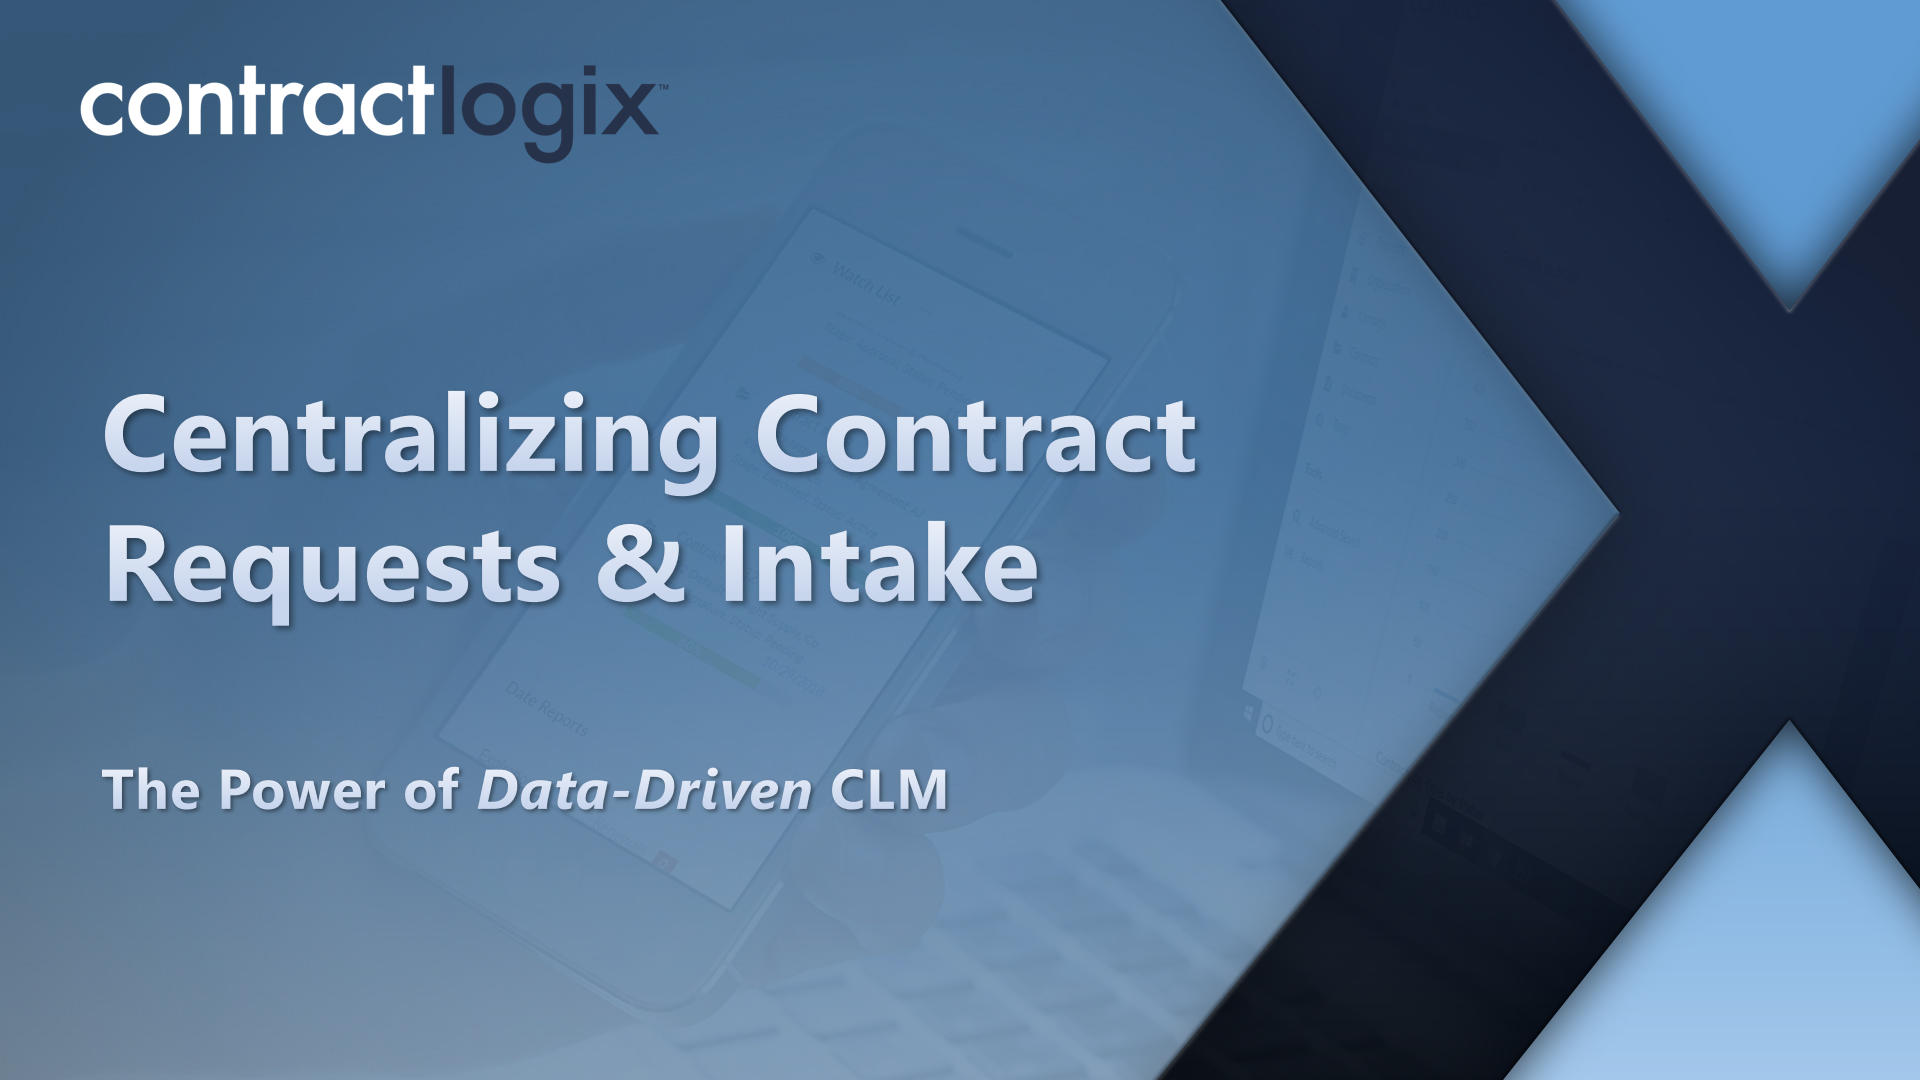 Next Generation of Contract Management